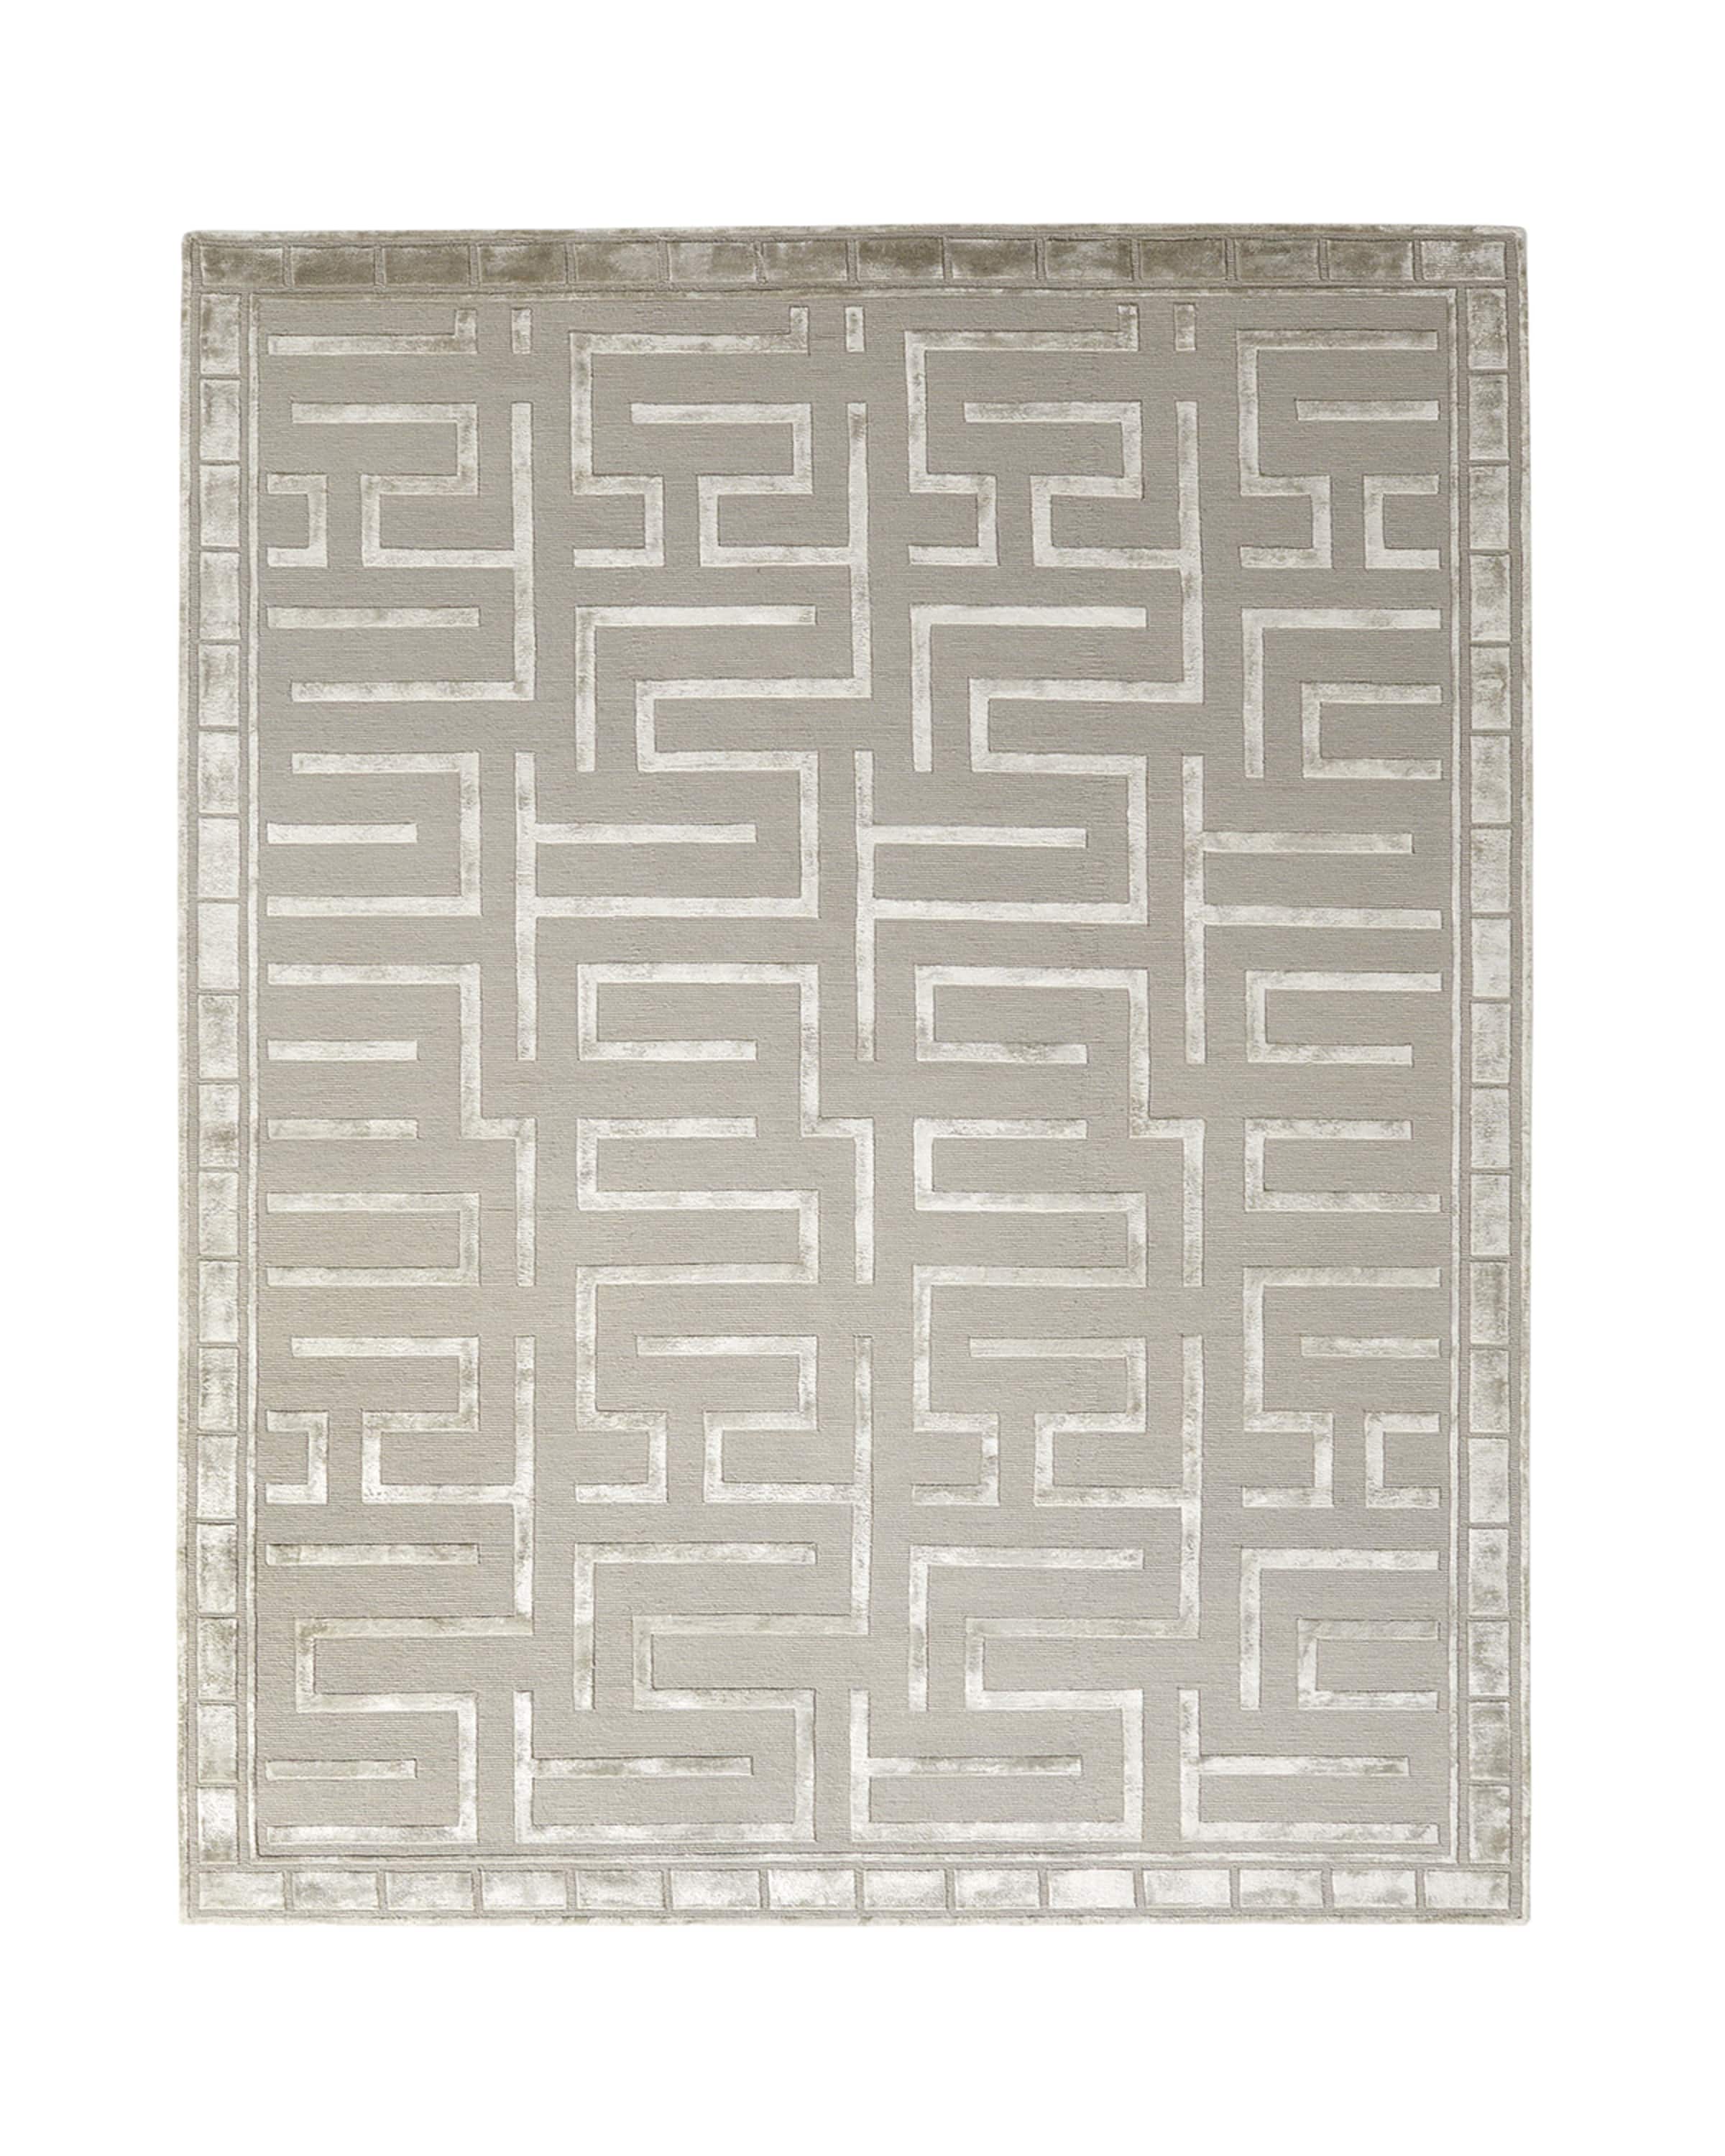 Exquisite Rugs Rowling Maze Hand-Knotted Rug, 10' x 14'